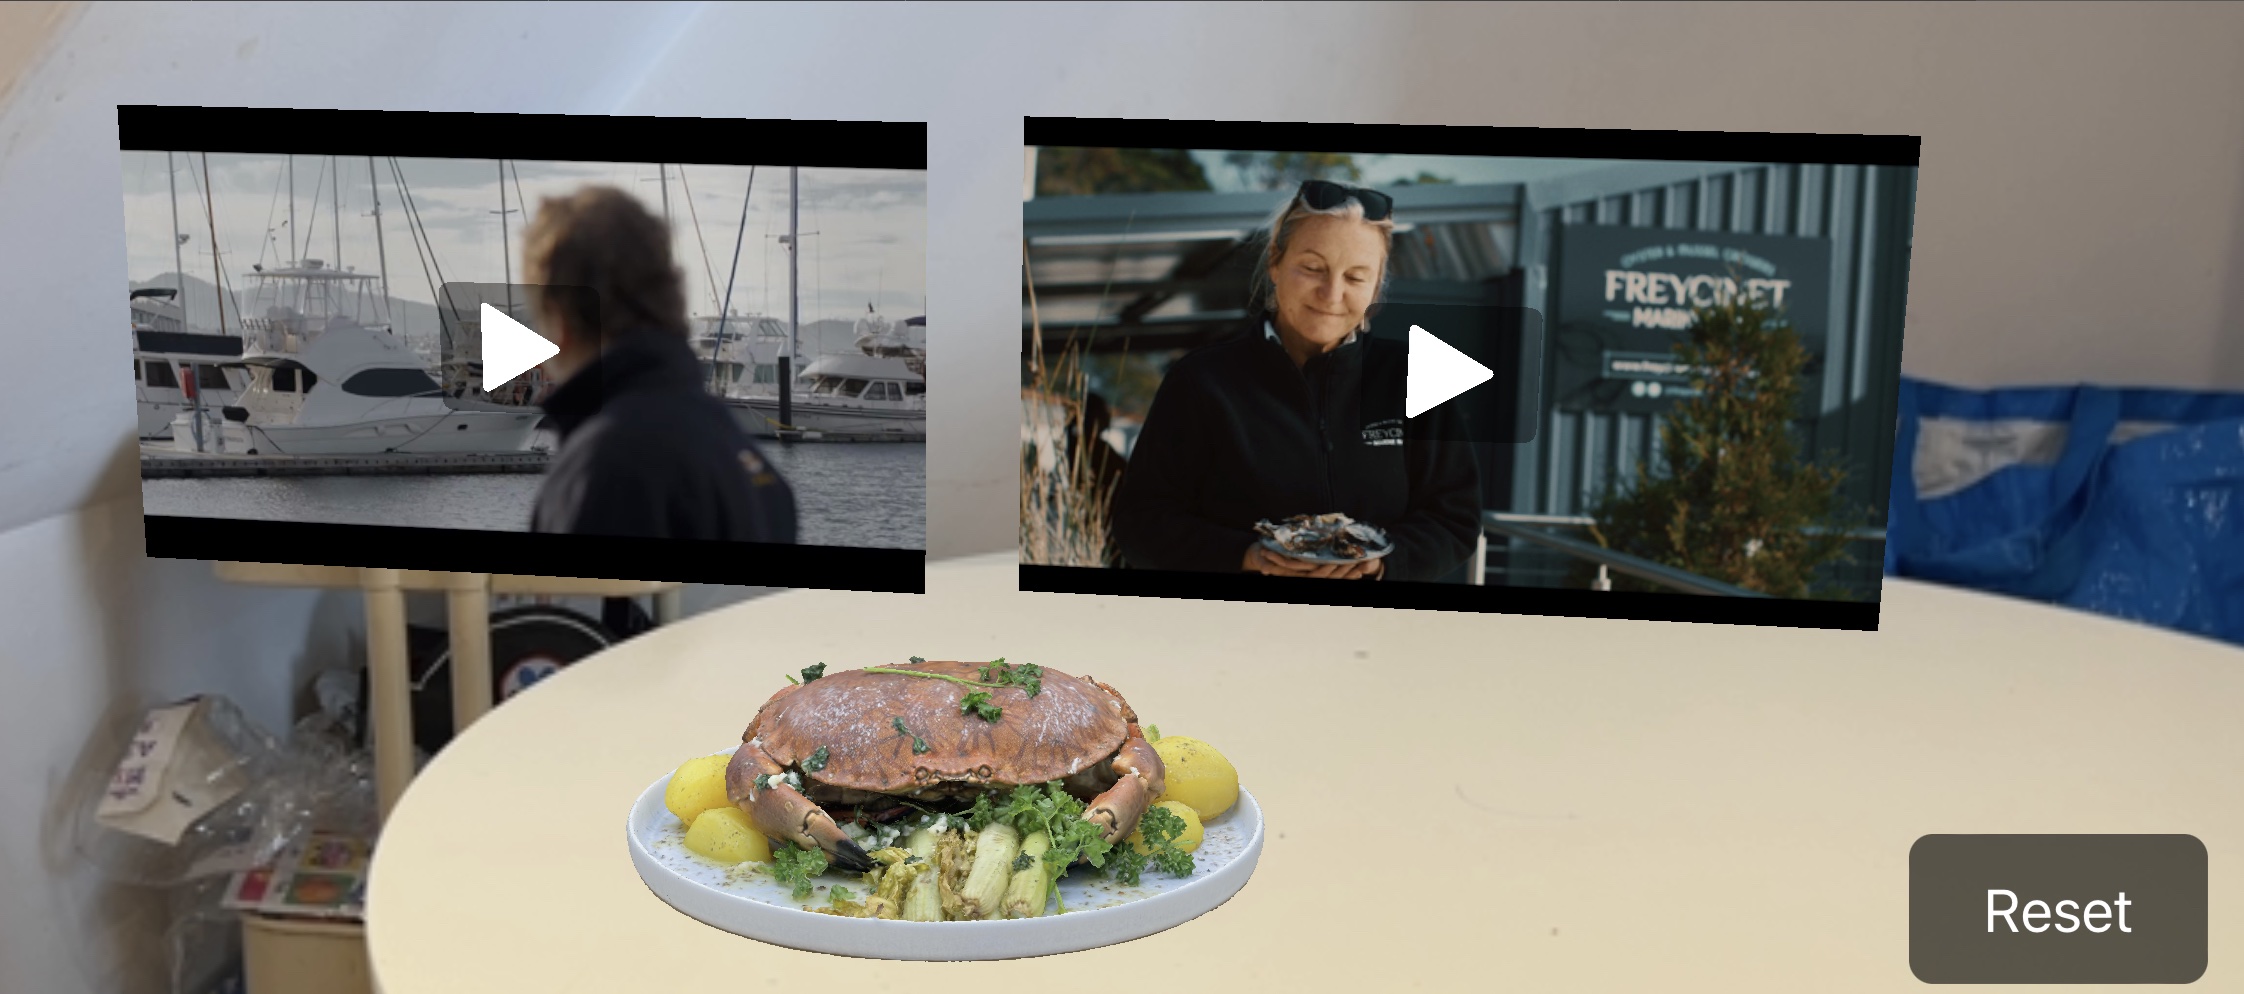 Web-AR experience. Displaying Crab and Chips and video within the Web AR experience.